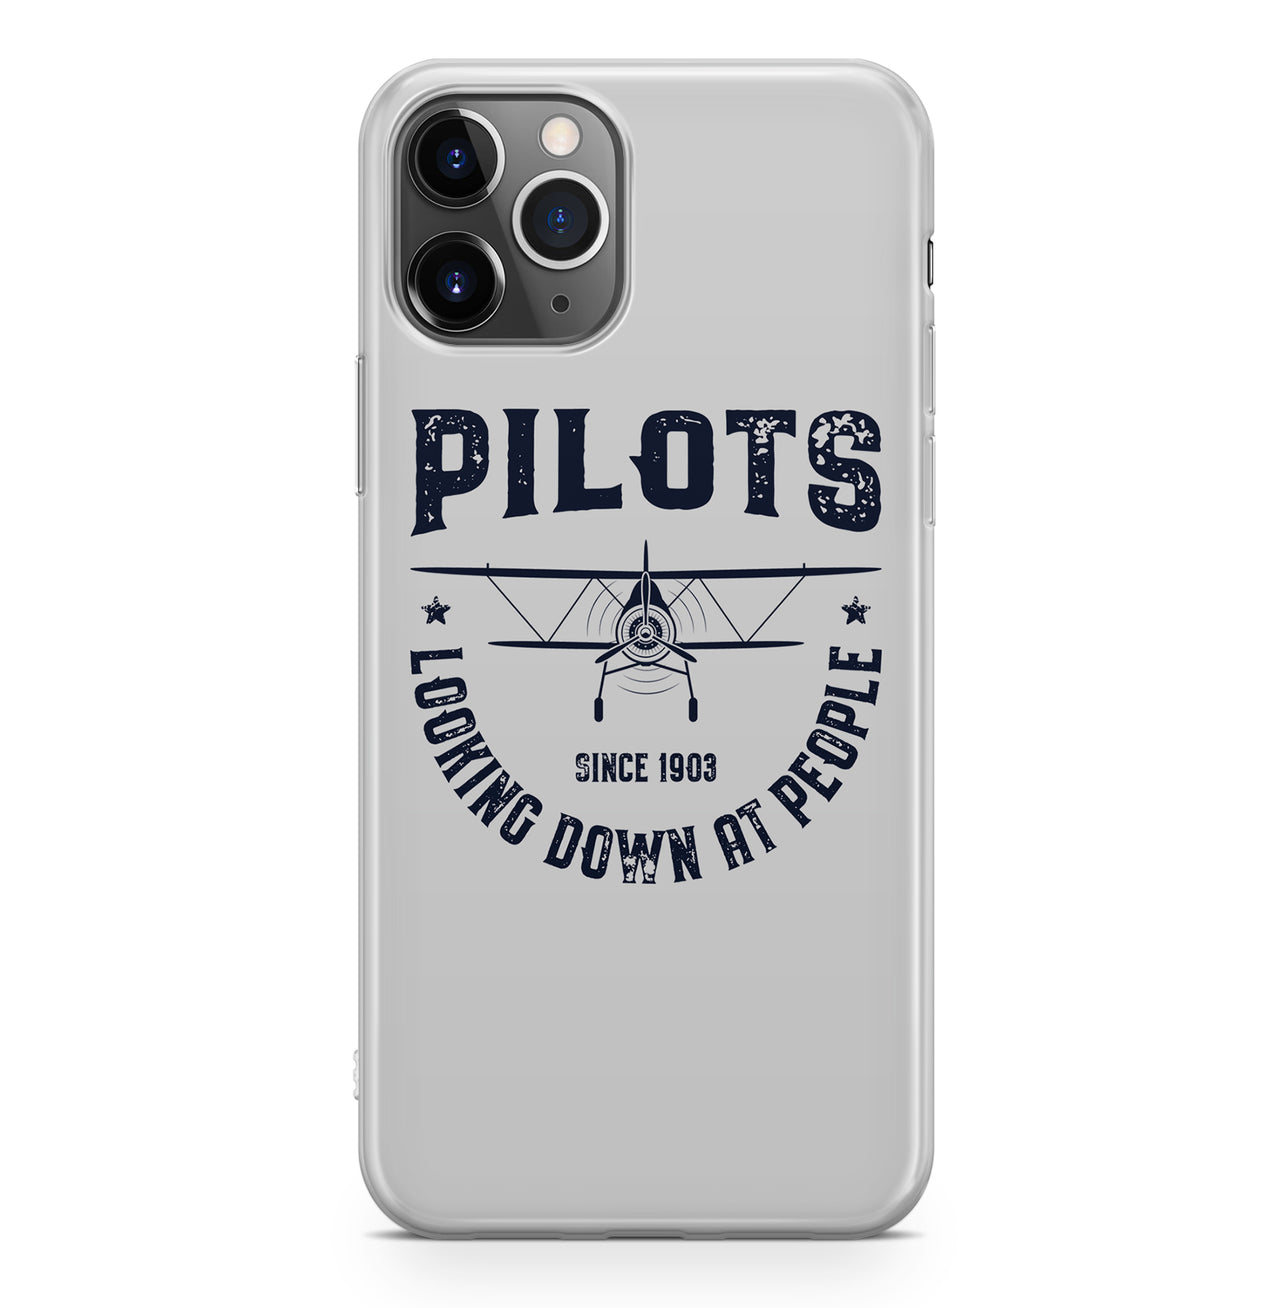 Pilots Looking Down at People Since 1903 Designed iPhone Cases